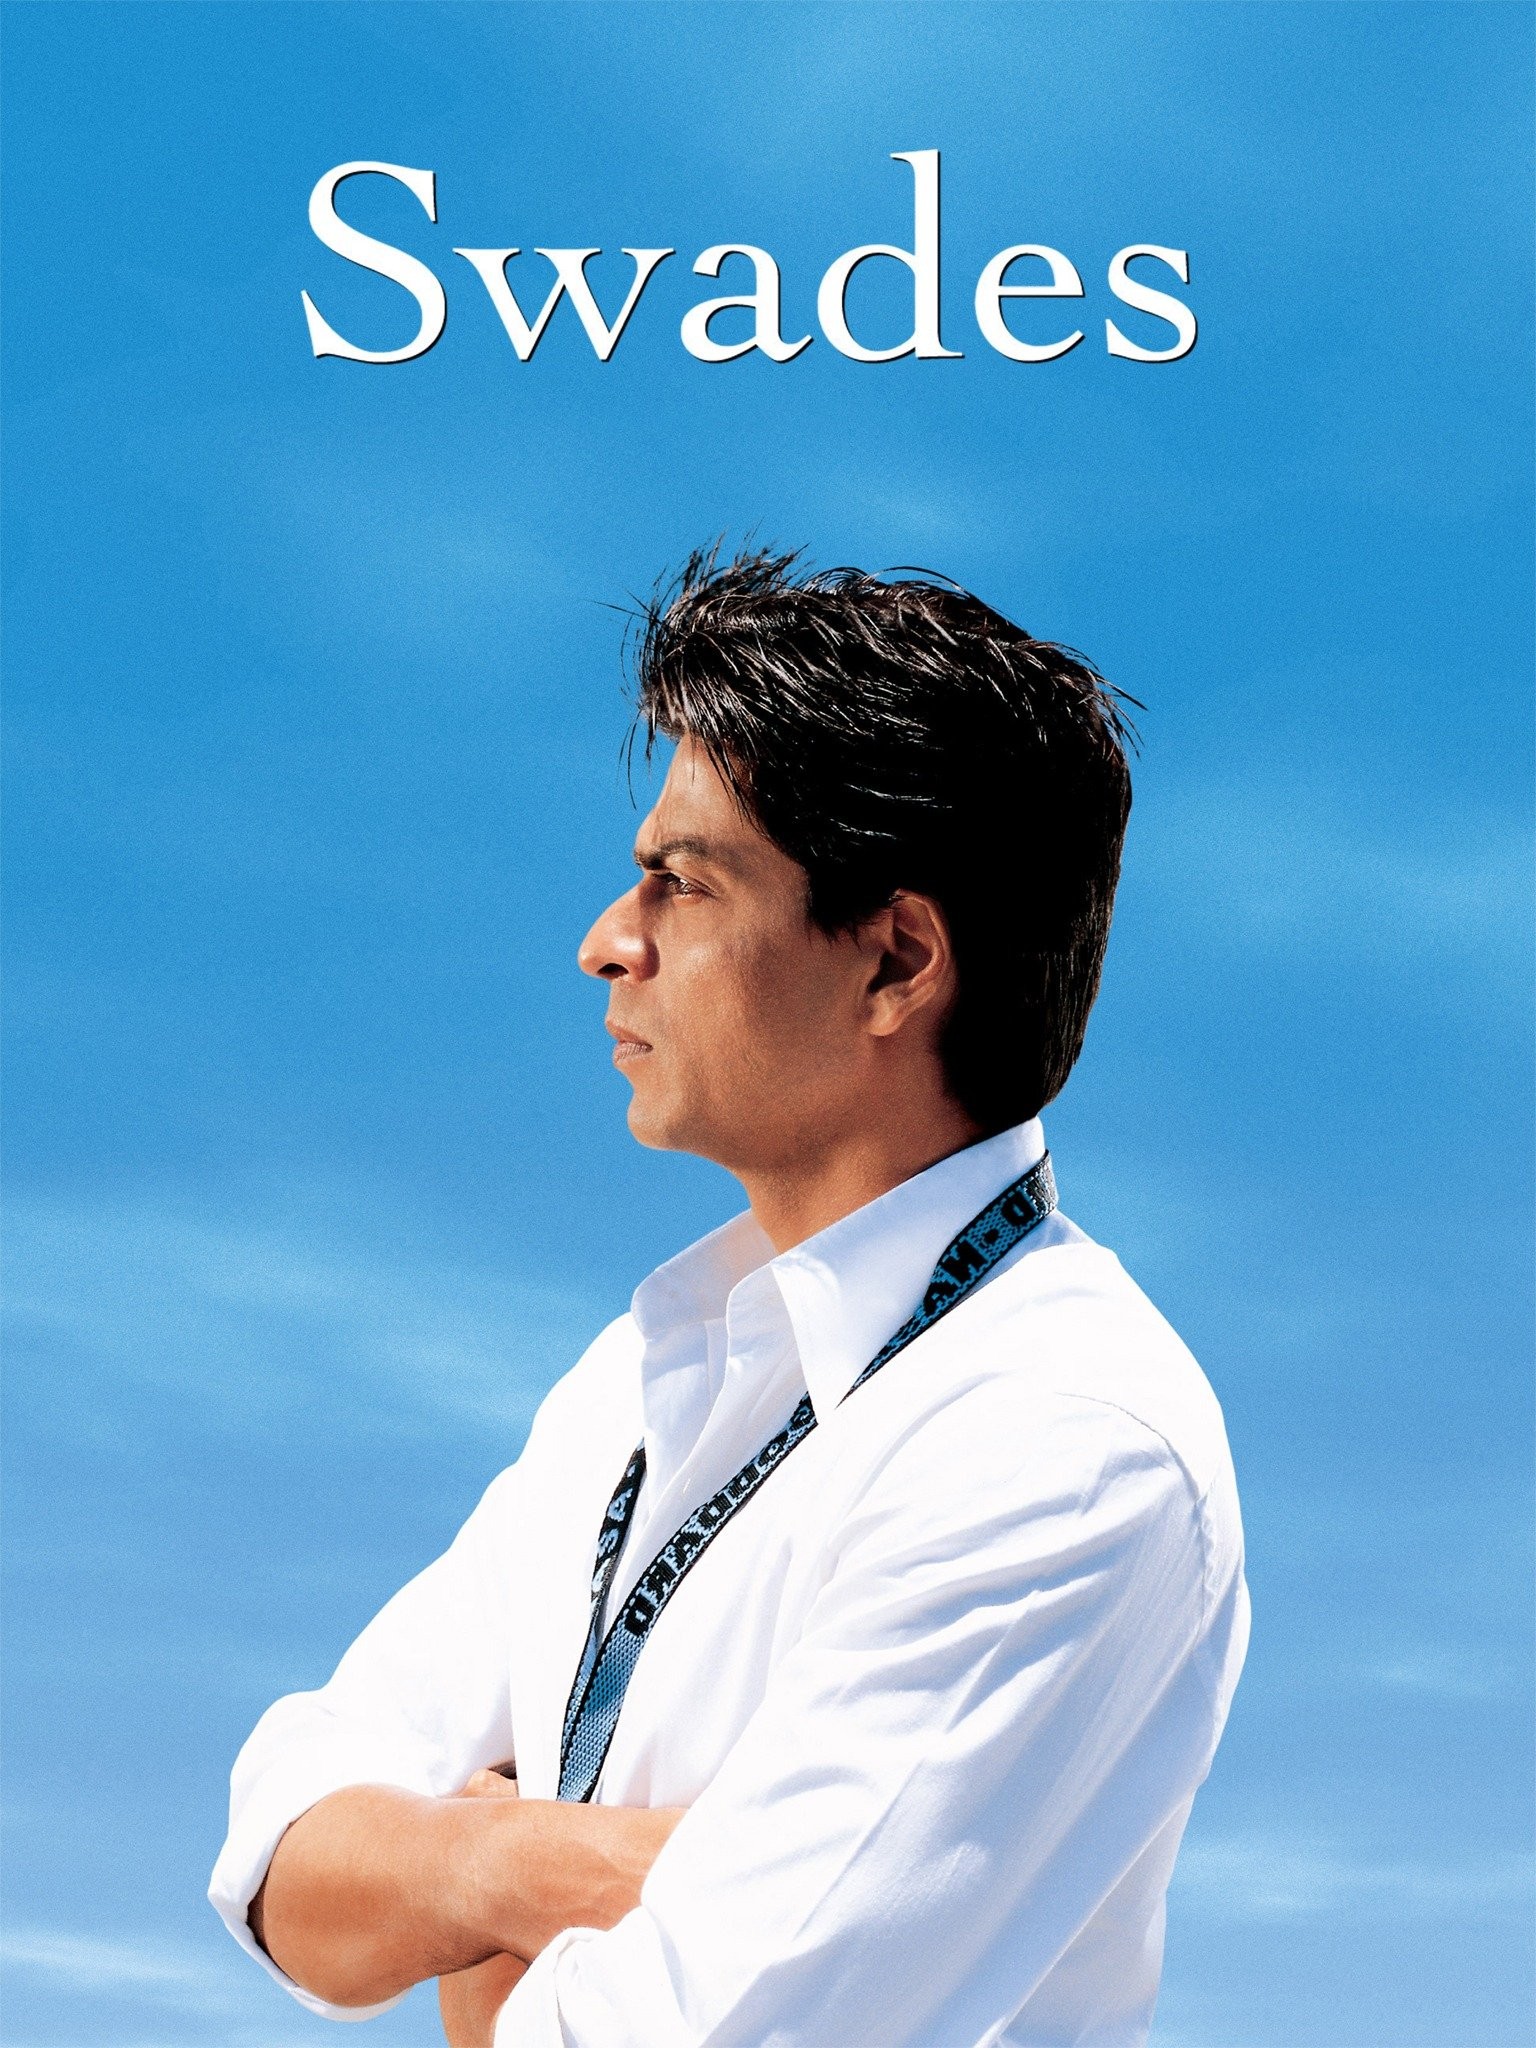 Swades: A Love Letter To Home, A Tale of Homecoming